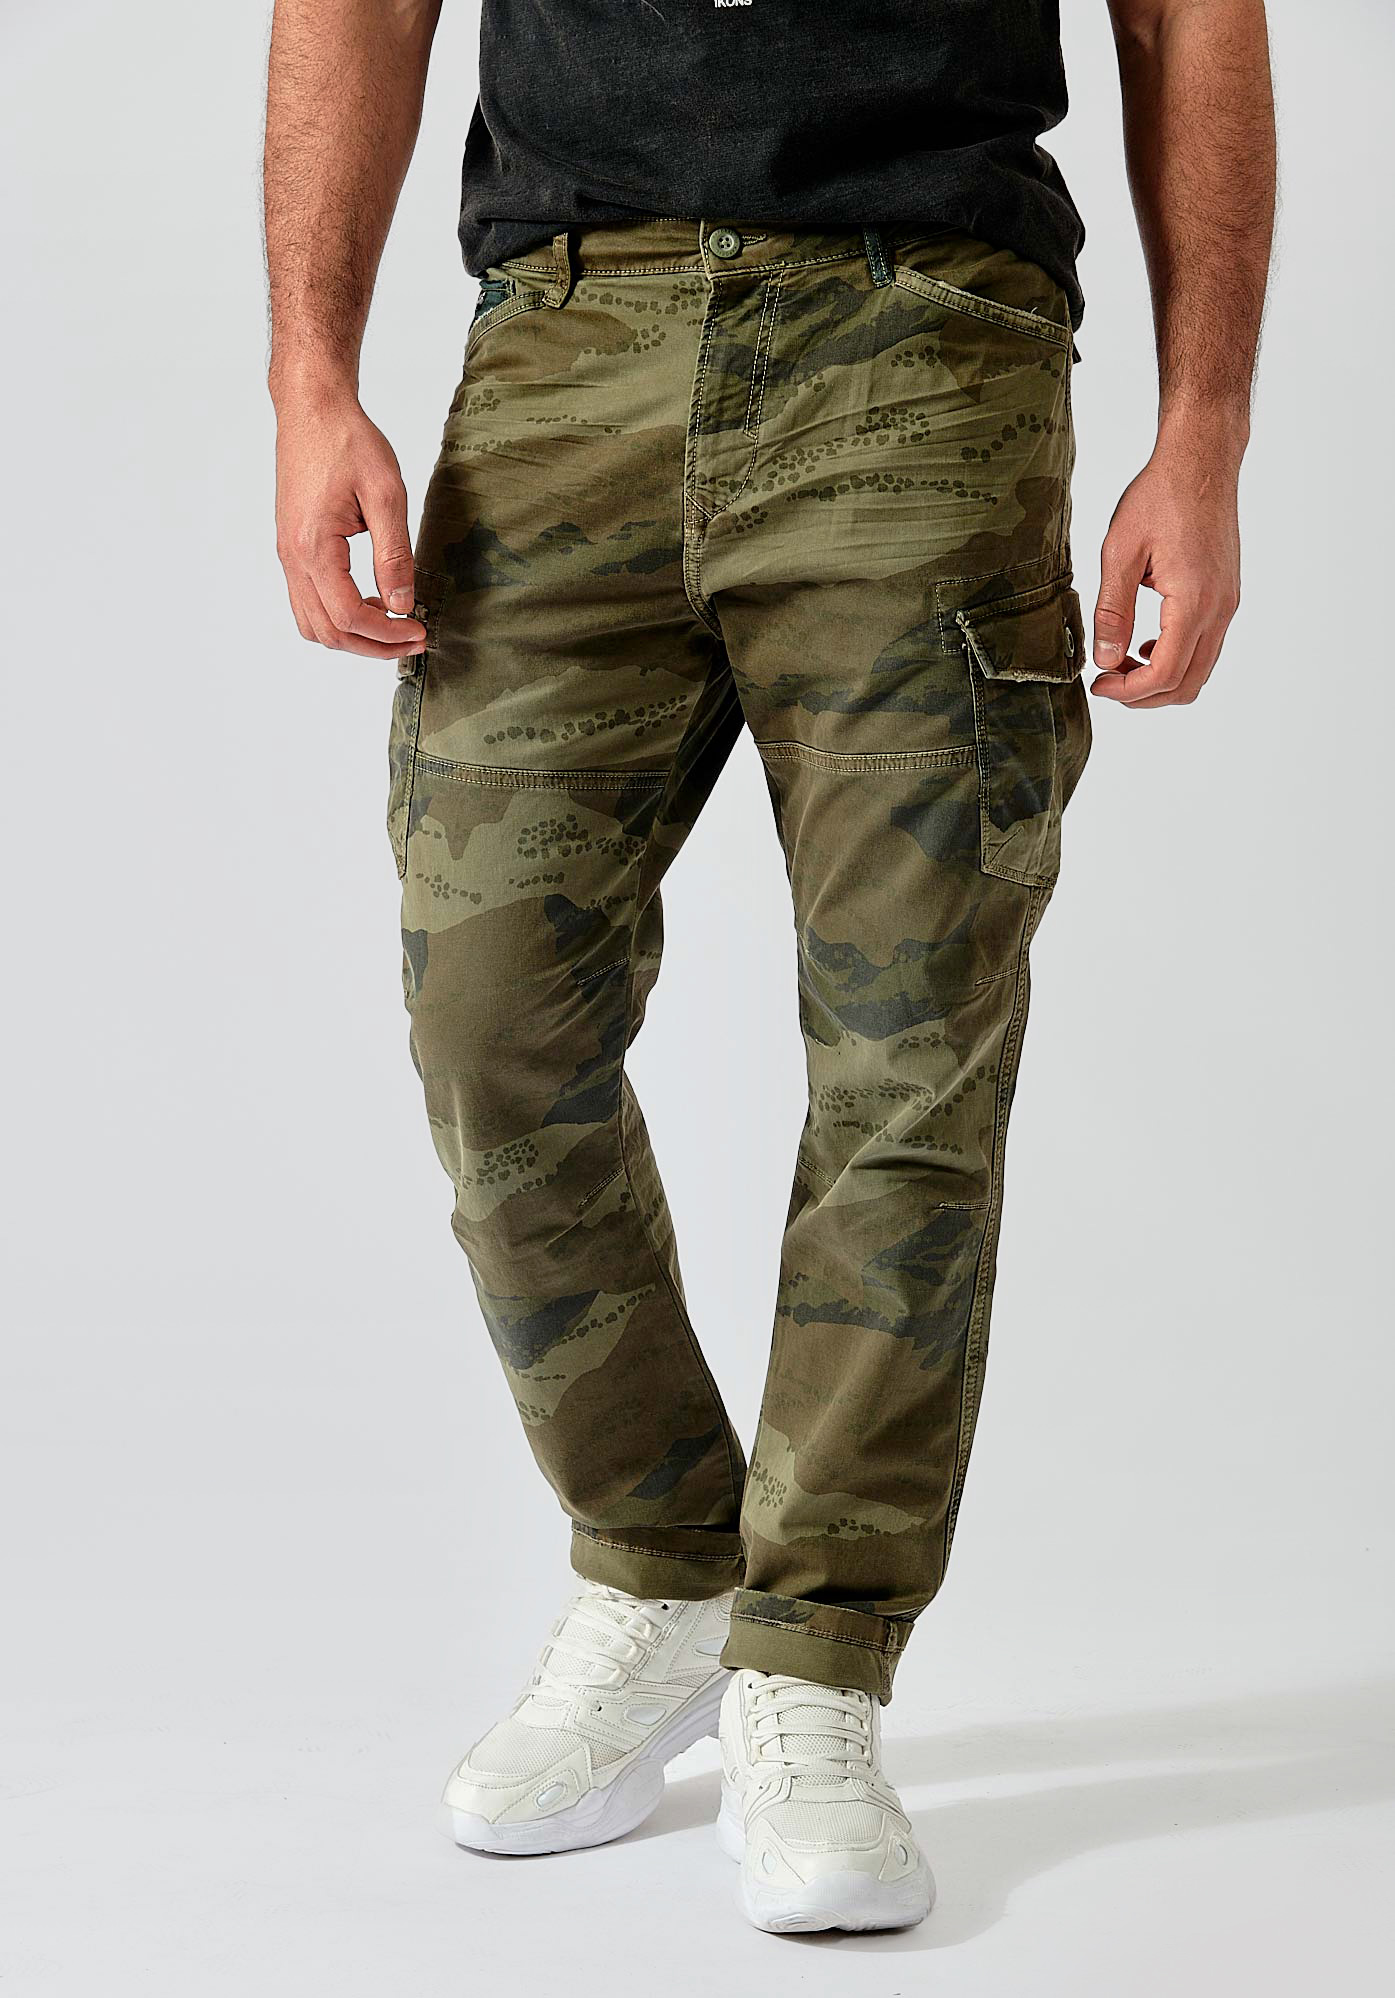 Men's relaxed-fit camouflage jeans Kalis - Kaporal